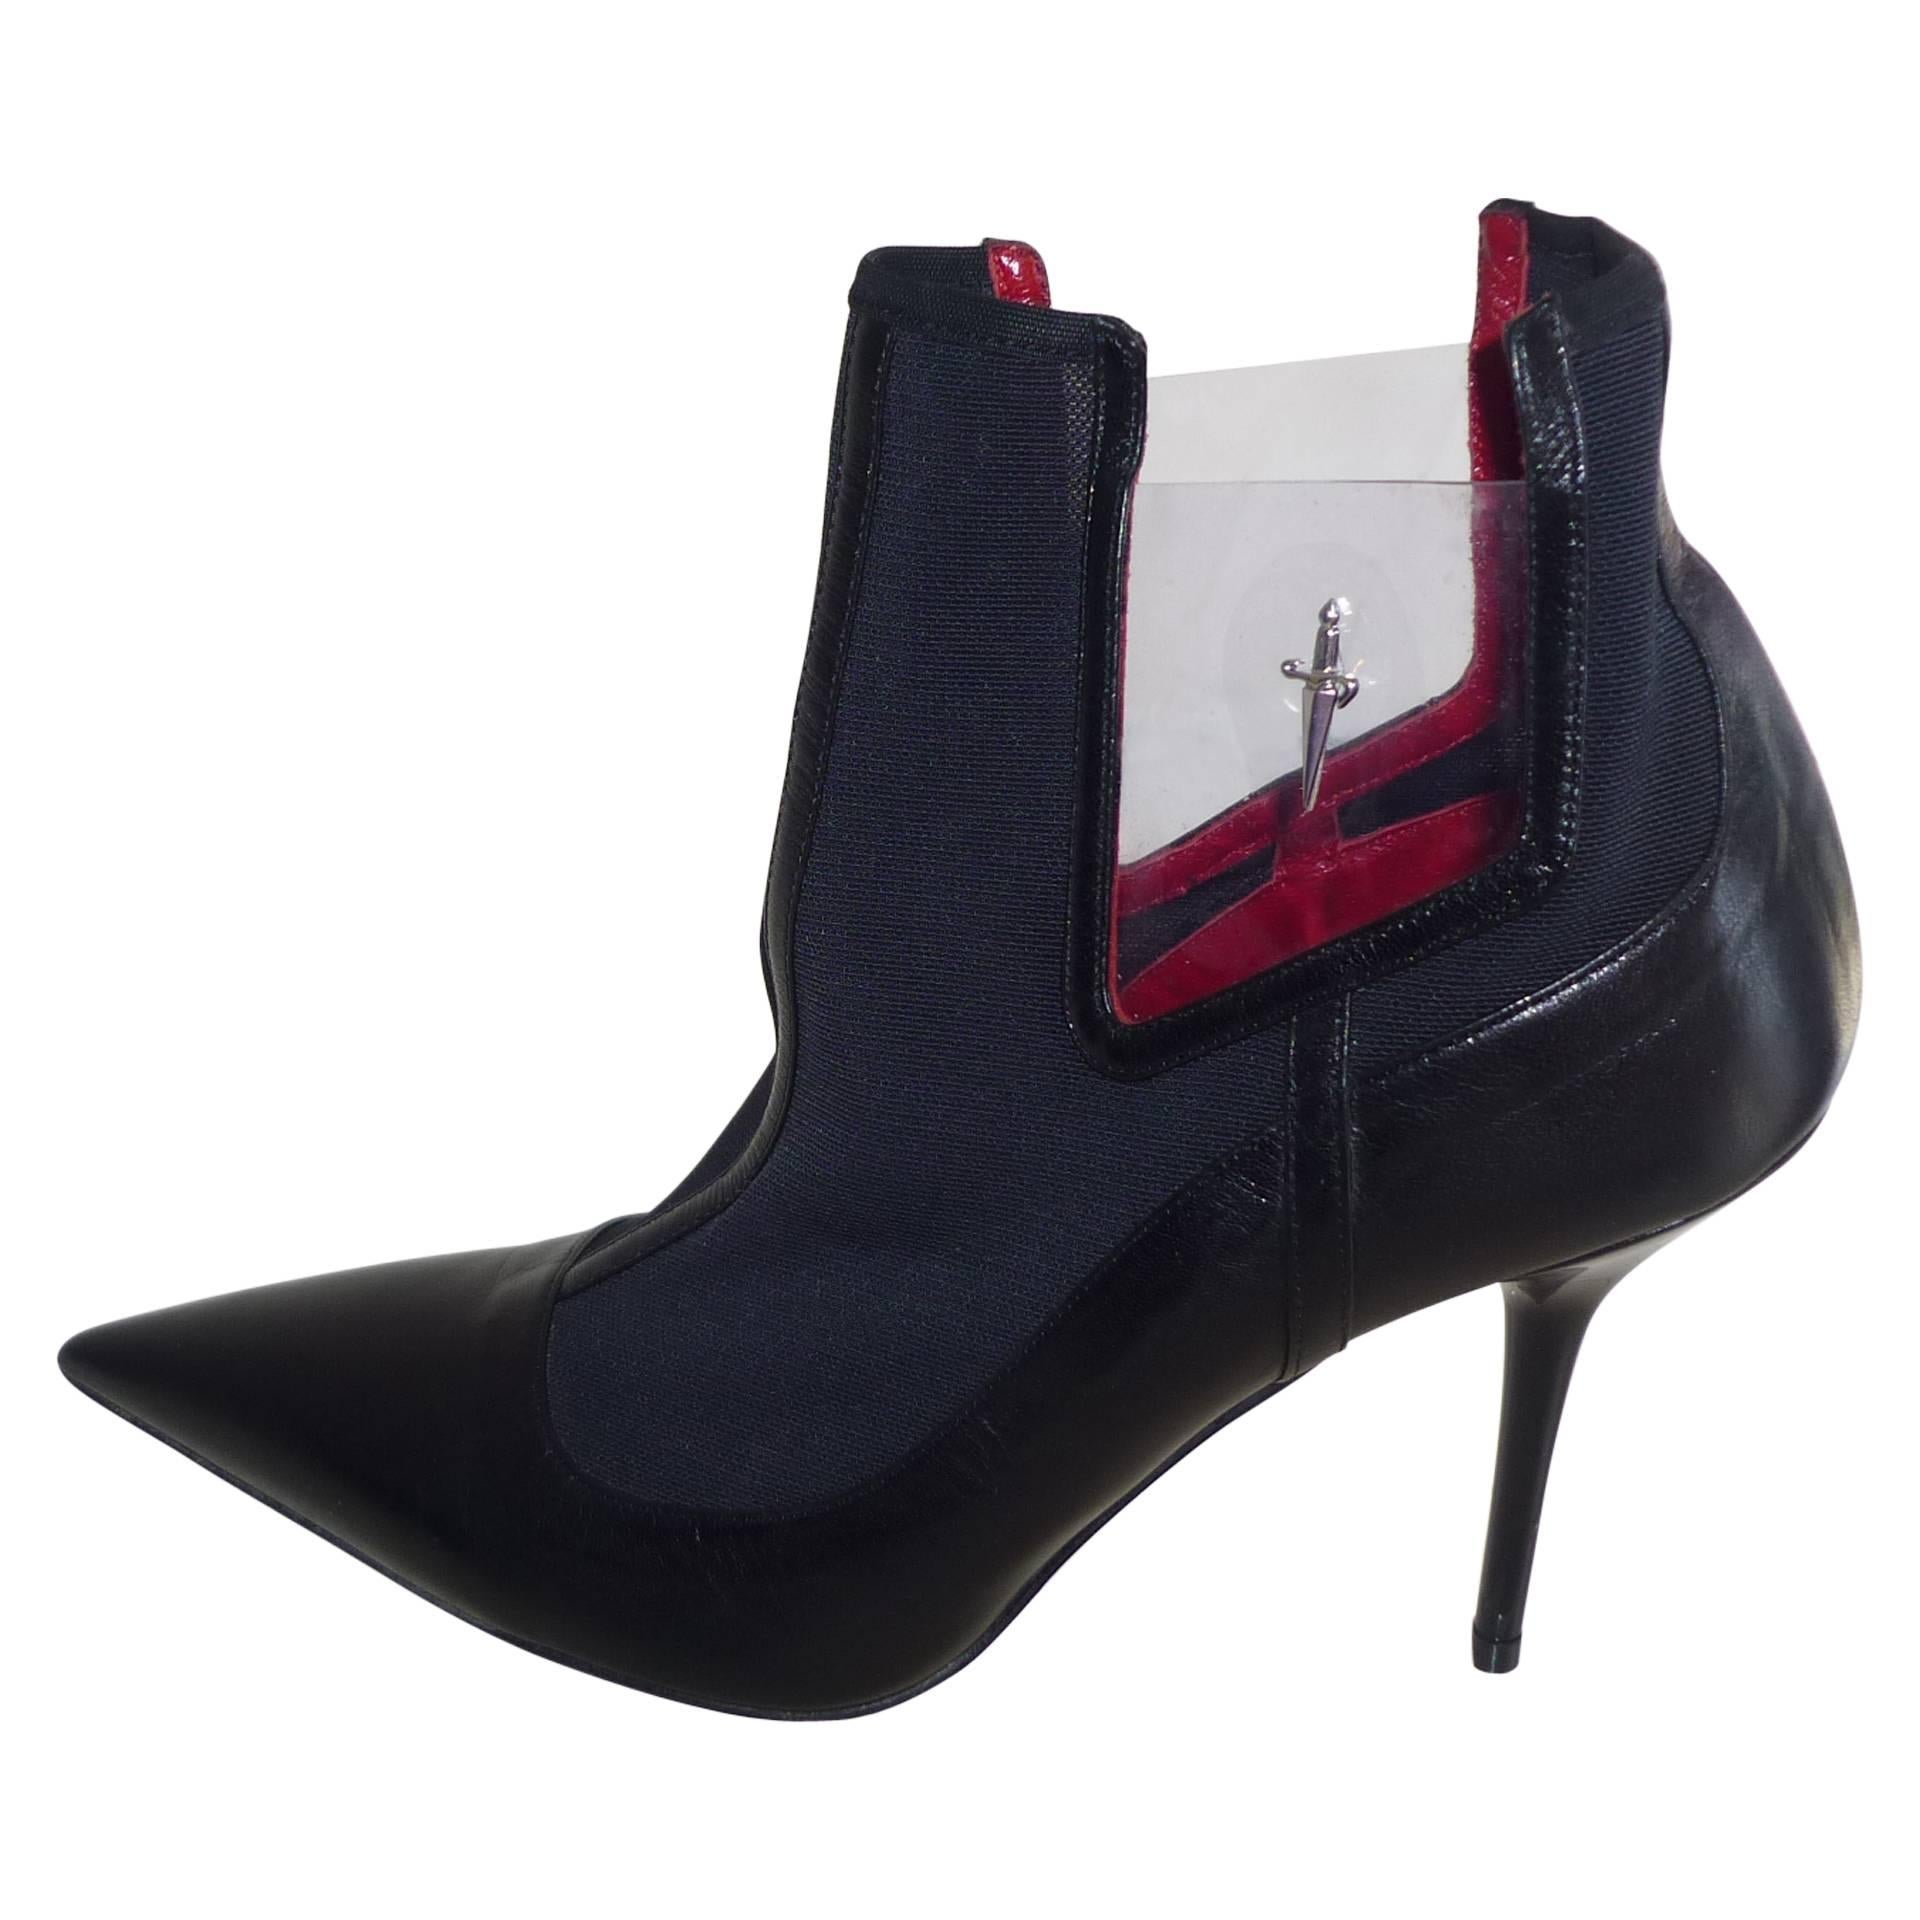 Cesare Paciotti Ankle Boots in Leather, Mesh and Plastic 38 1/2